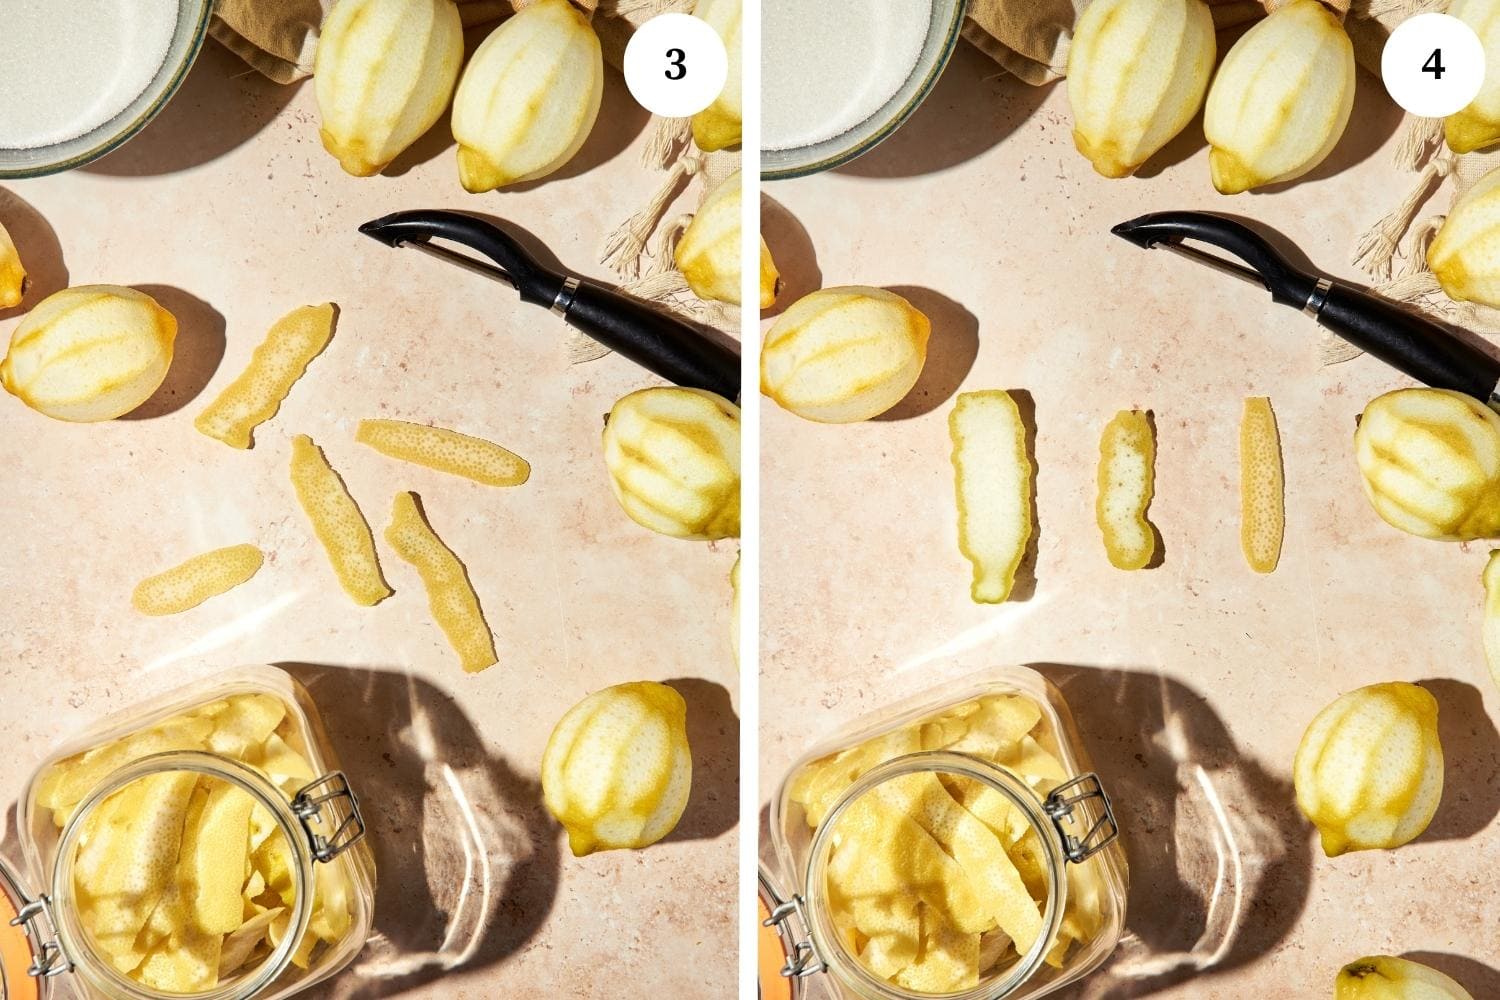 Homemade limoncello procedure: the lemons are peeled. The peels are put in a glass jar.